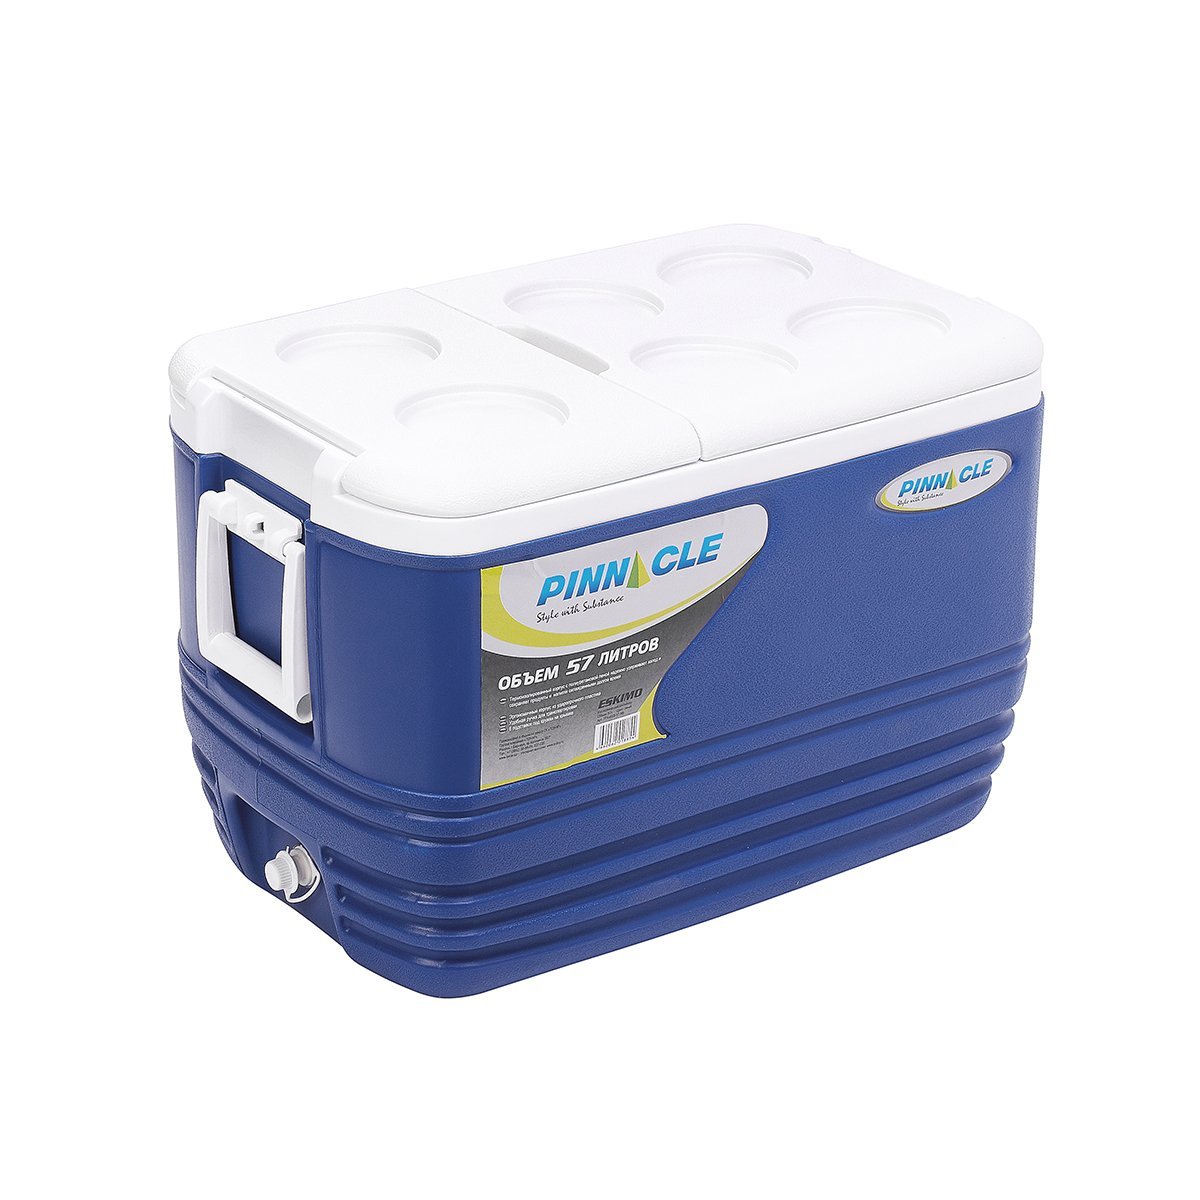 Eskimo Large Ice Chest with Side Handle, Drain Plug and 6 Cup Holders, 60 qt, navy blue